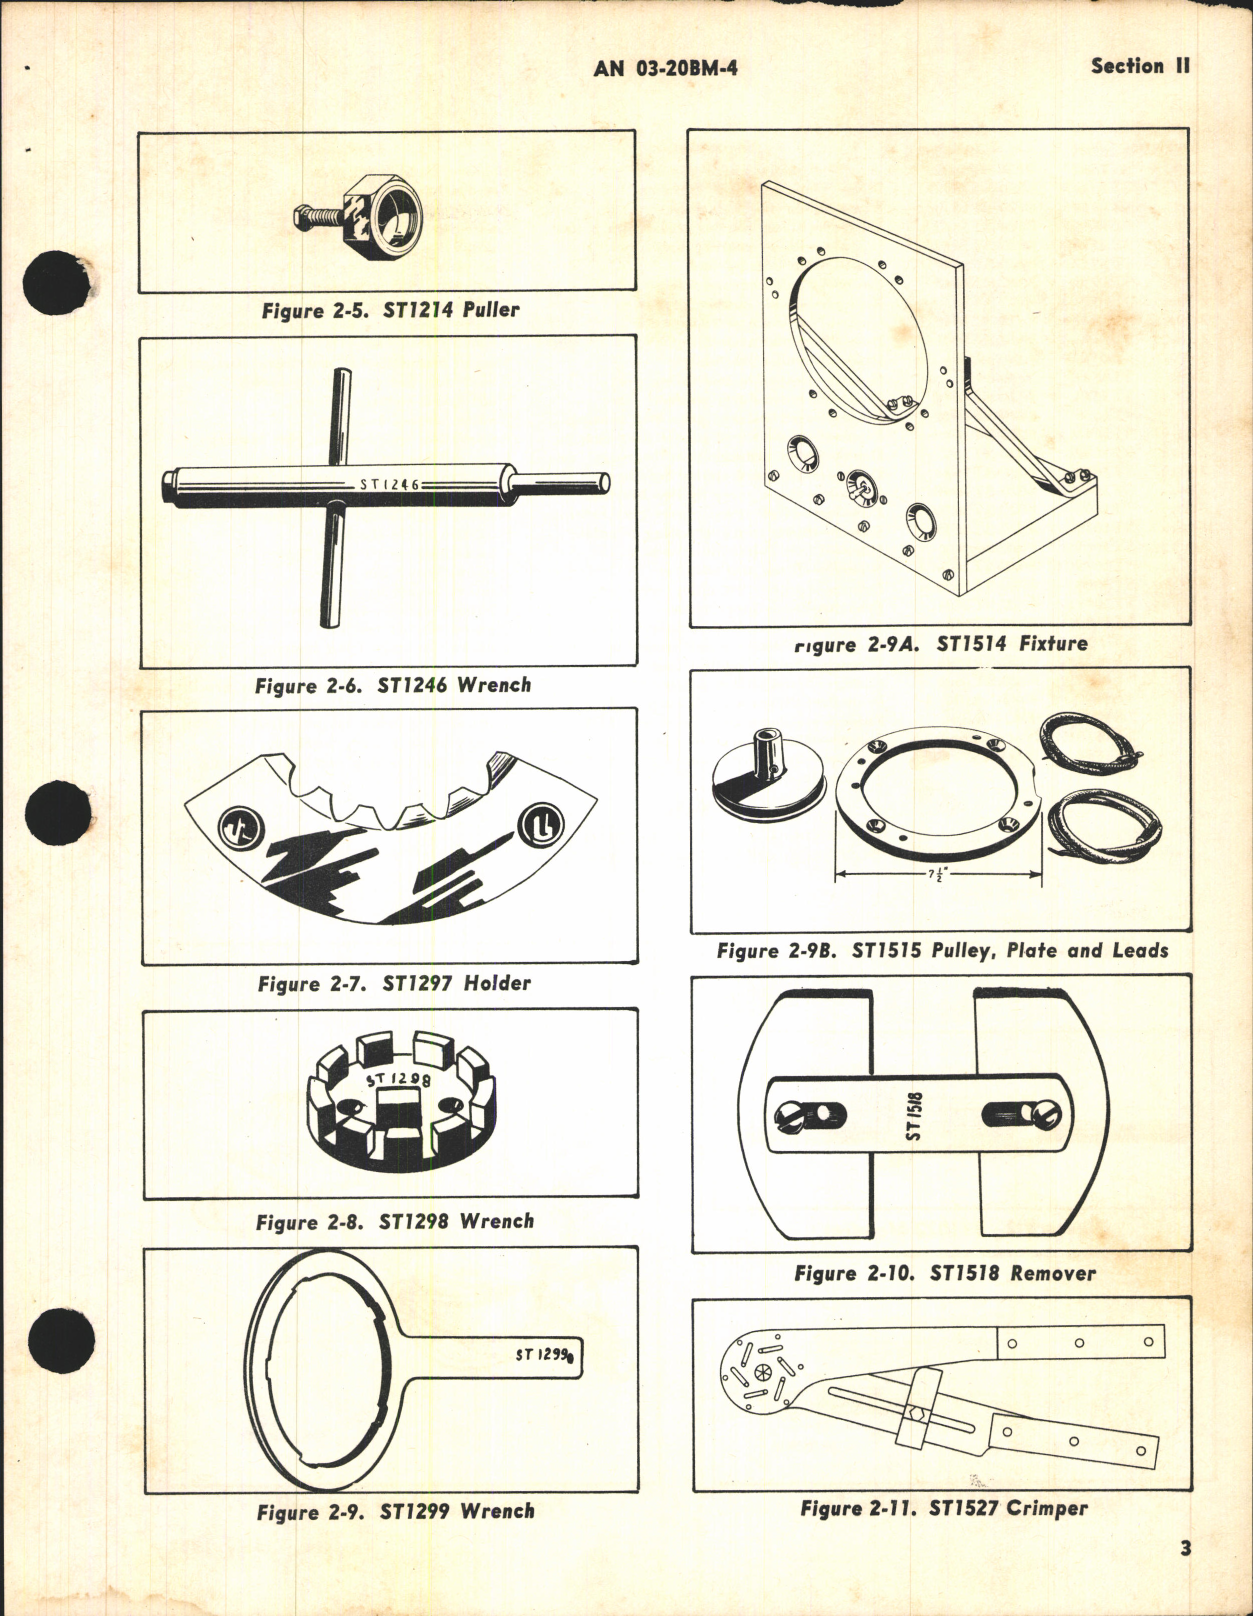 Sample page 7 from AirCorps Library document: Overhaul Instructions for Electric Propeller Models C634S-C314 and C634S-C402